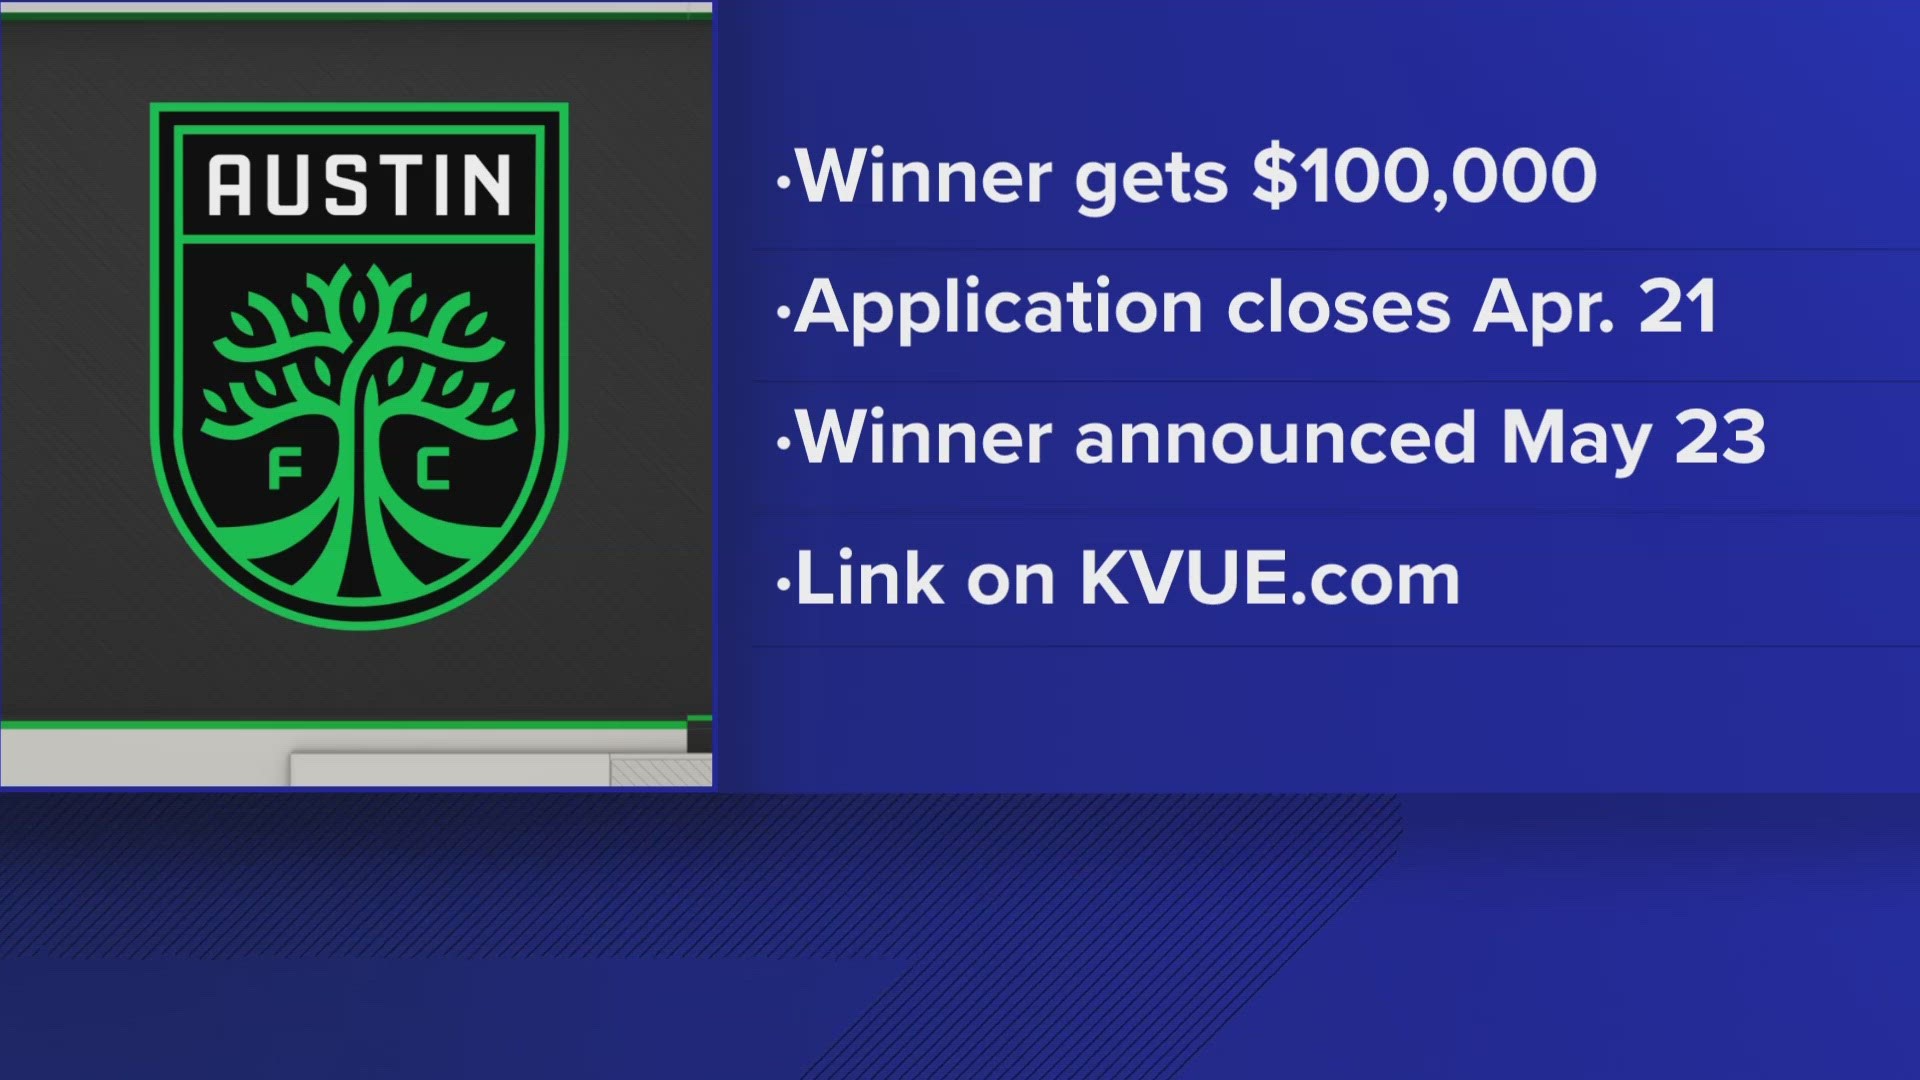 The winner of the third annual event will be honored at halftime of Austin FC's June 3 game against Real Salt Lake.